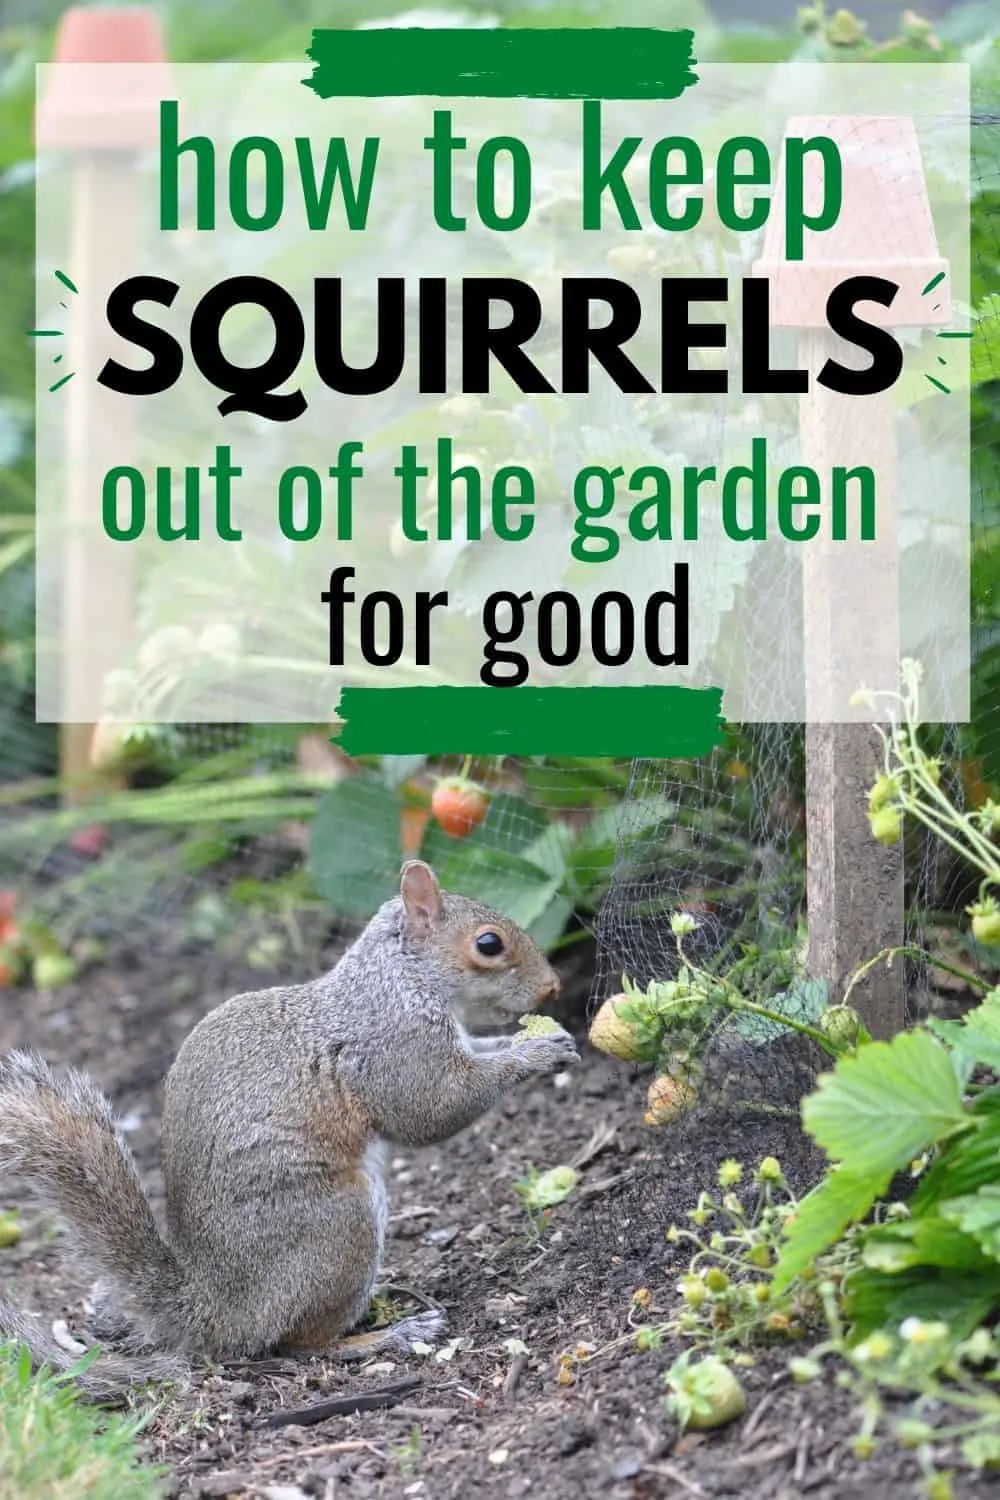 How to keep squirrels out of the garden for good